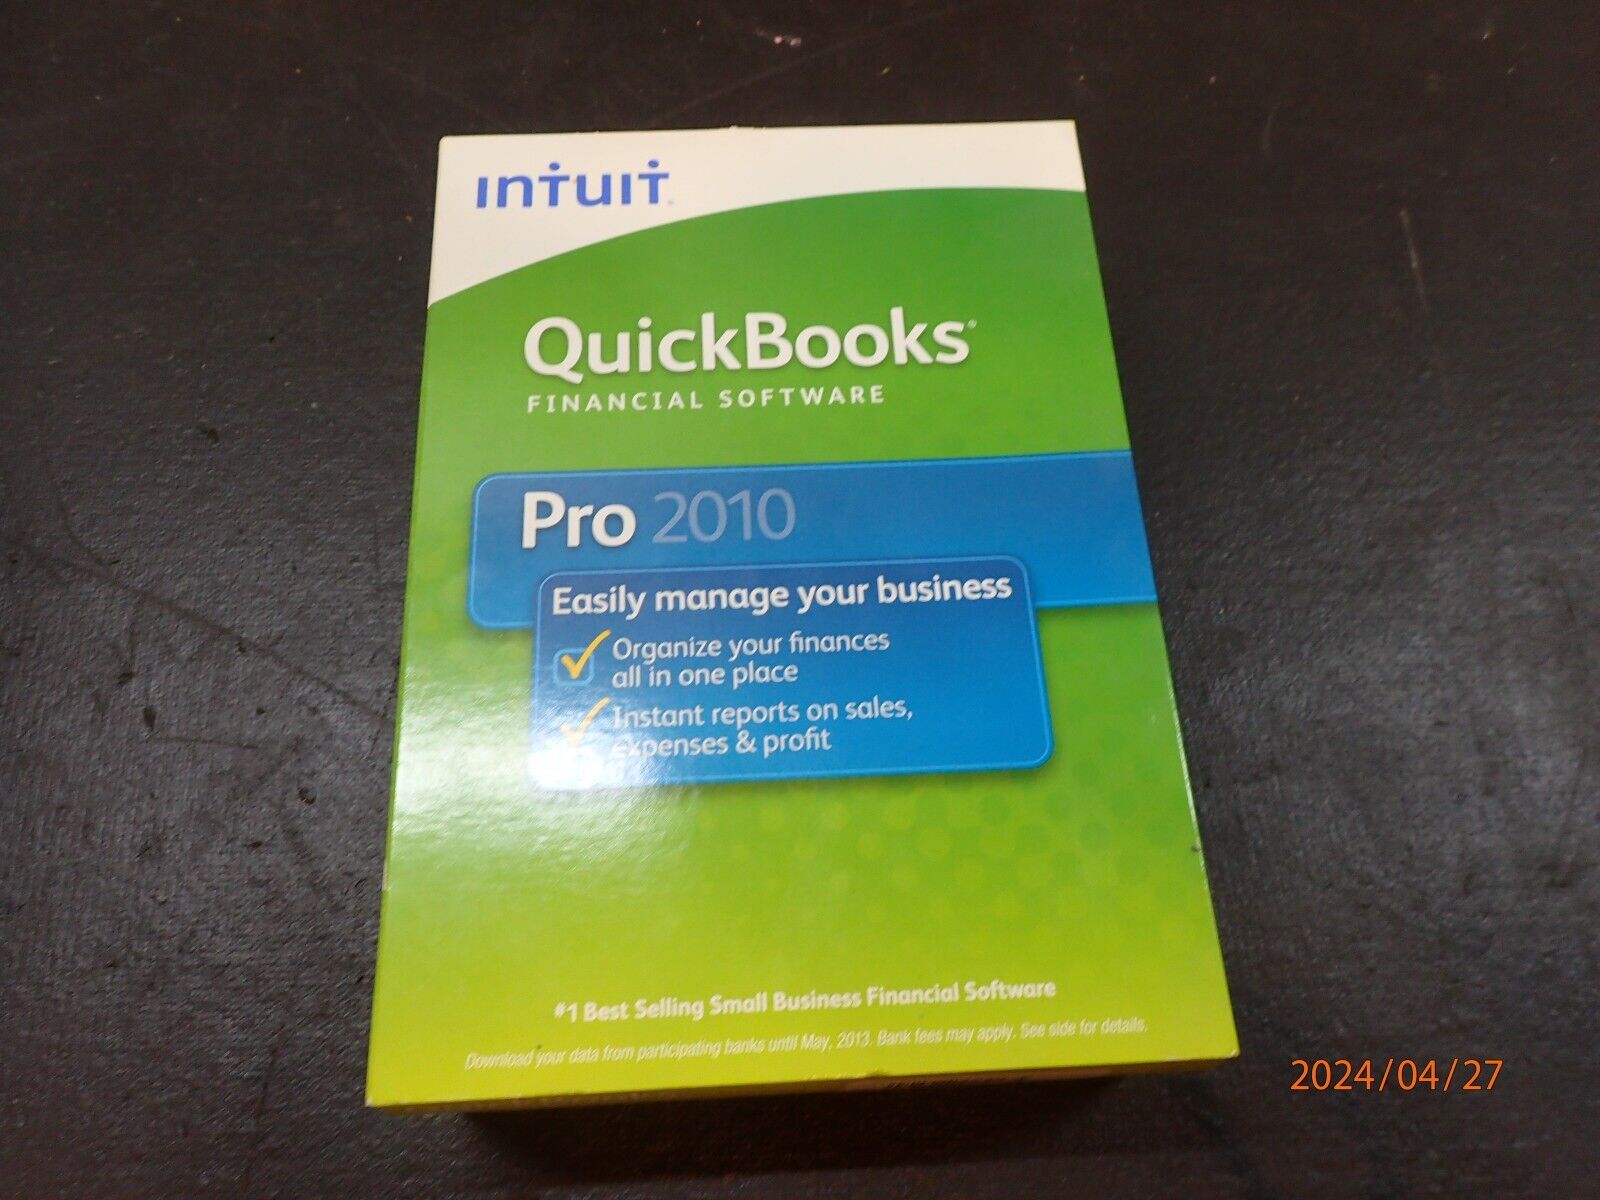 INTUIT QUICKBOOKS PRO 2010 FOR WINDOWS FULL RETAIL US VERSION With Extras